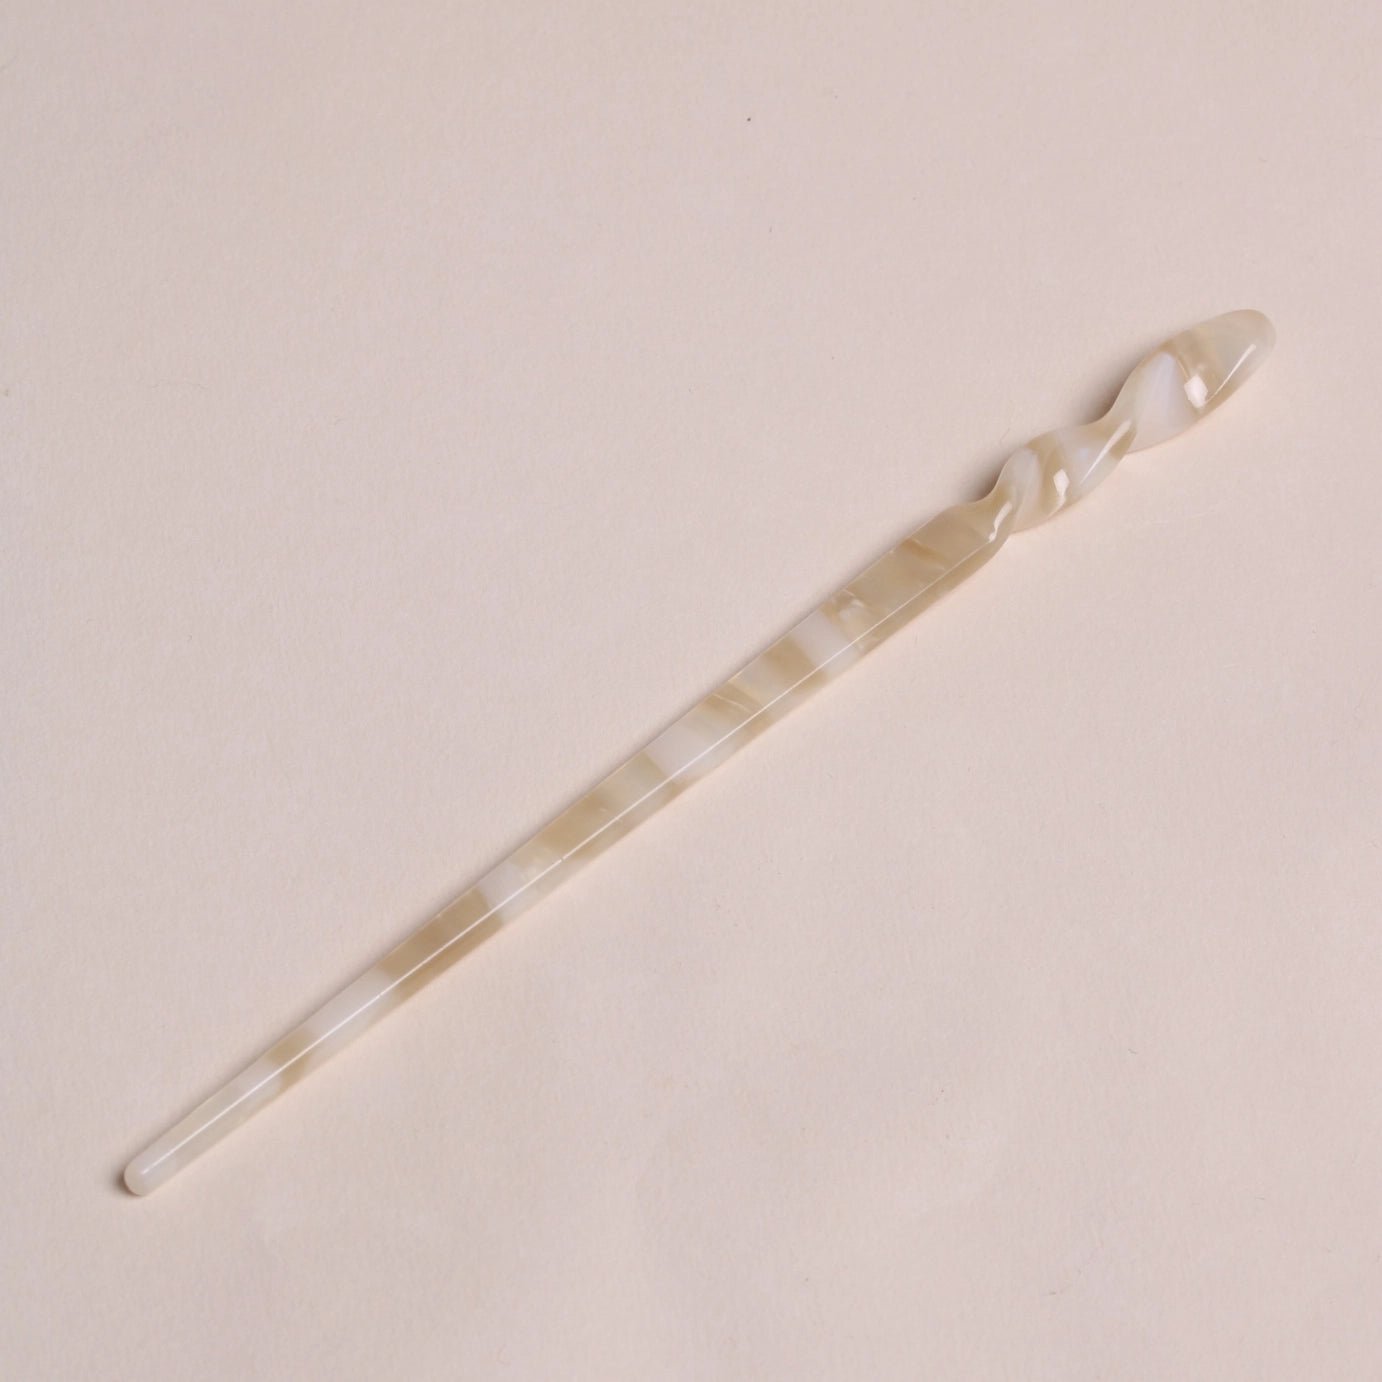 Acetate Hair Pin | Effortless and Elegant Style in Seconds - Wellaine